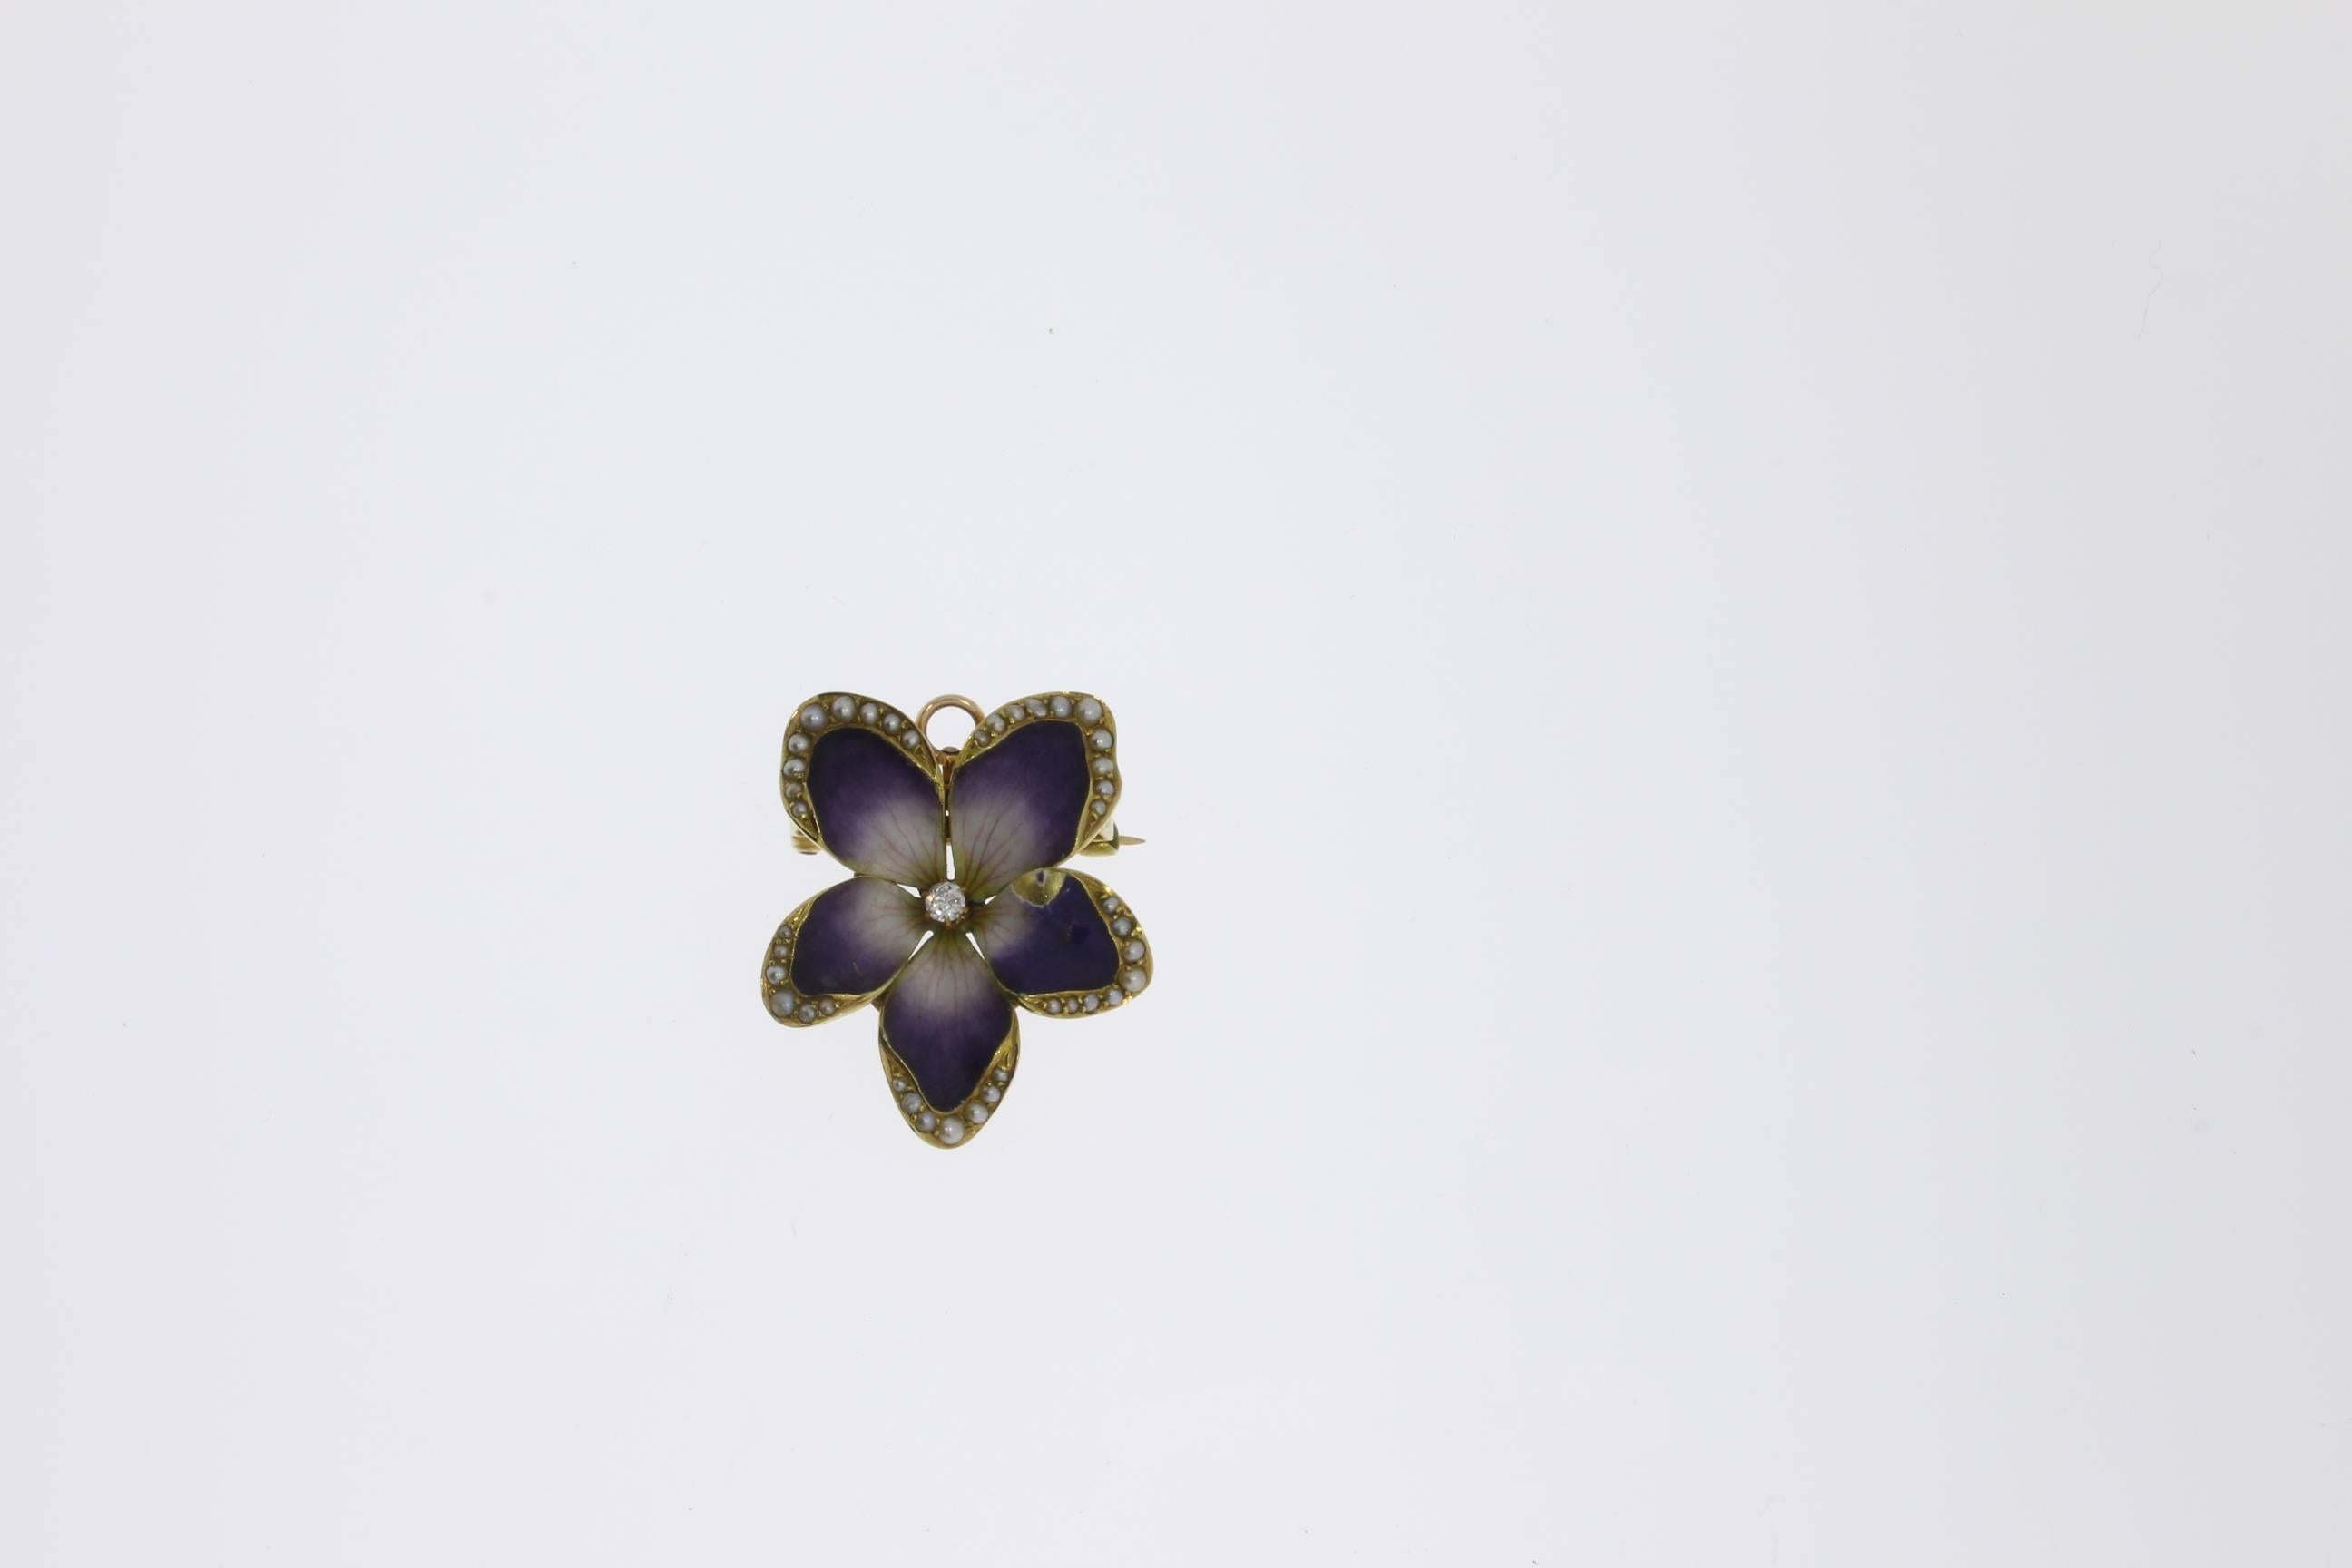 USA, around 1900. Very complex and fine workmanship. The beautiful brooch is a delightful example of Art Nouveau jewelry and its motifs drawn from nature. The diamond weighing approximately 0.06 carat is in the center of the violet. Surroundet by 39